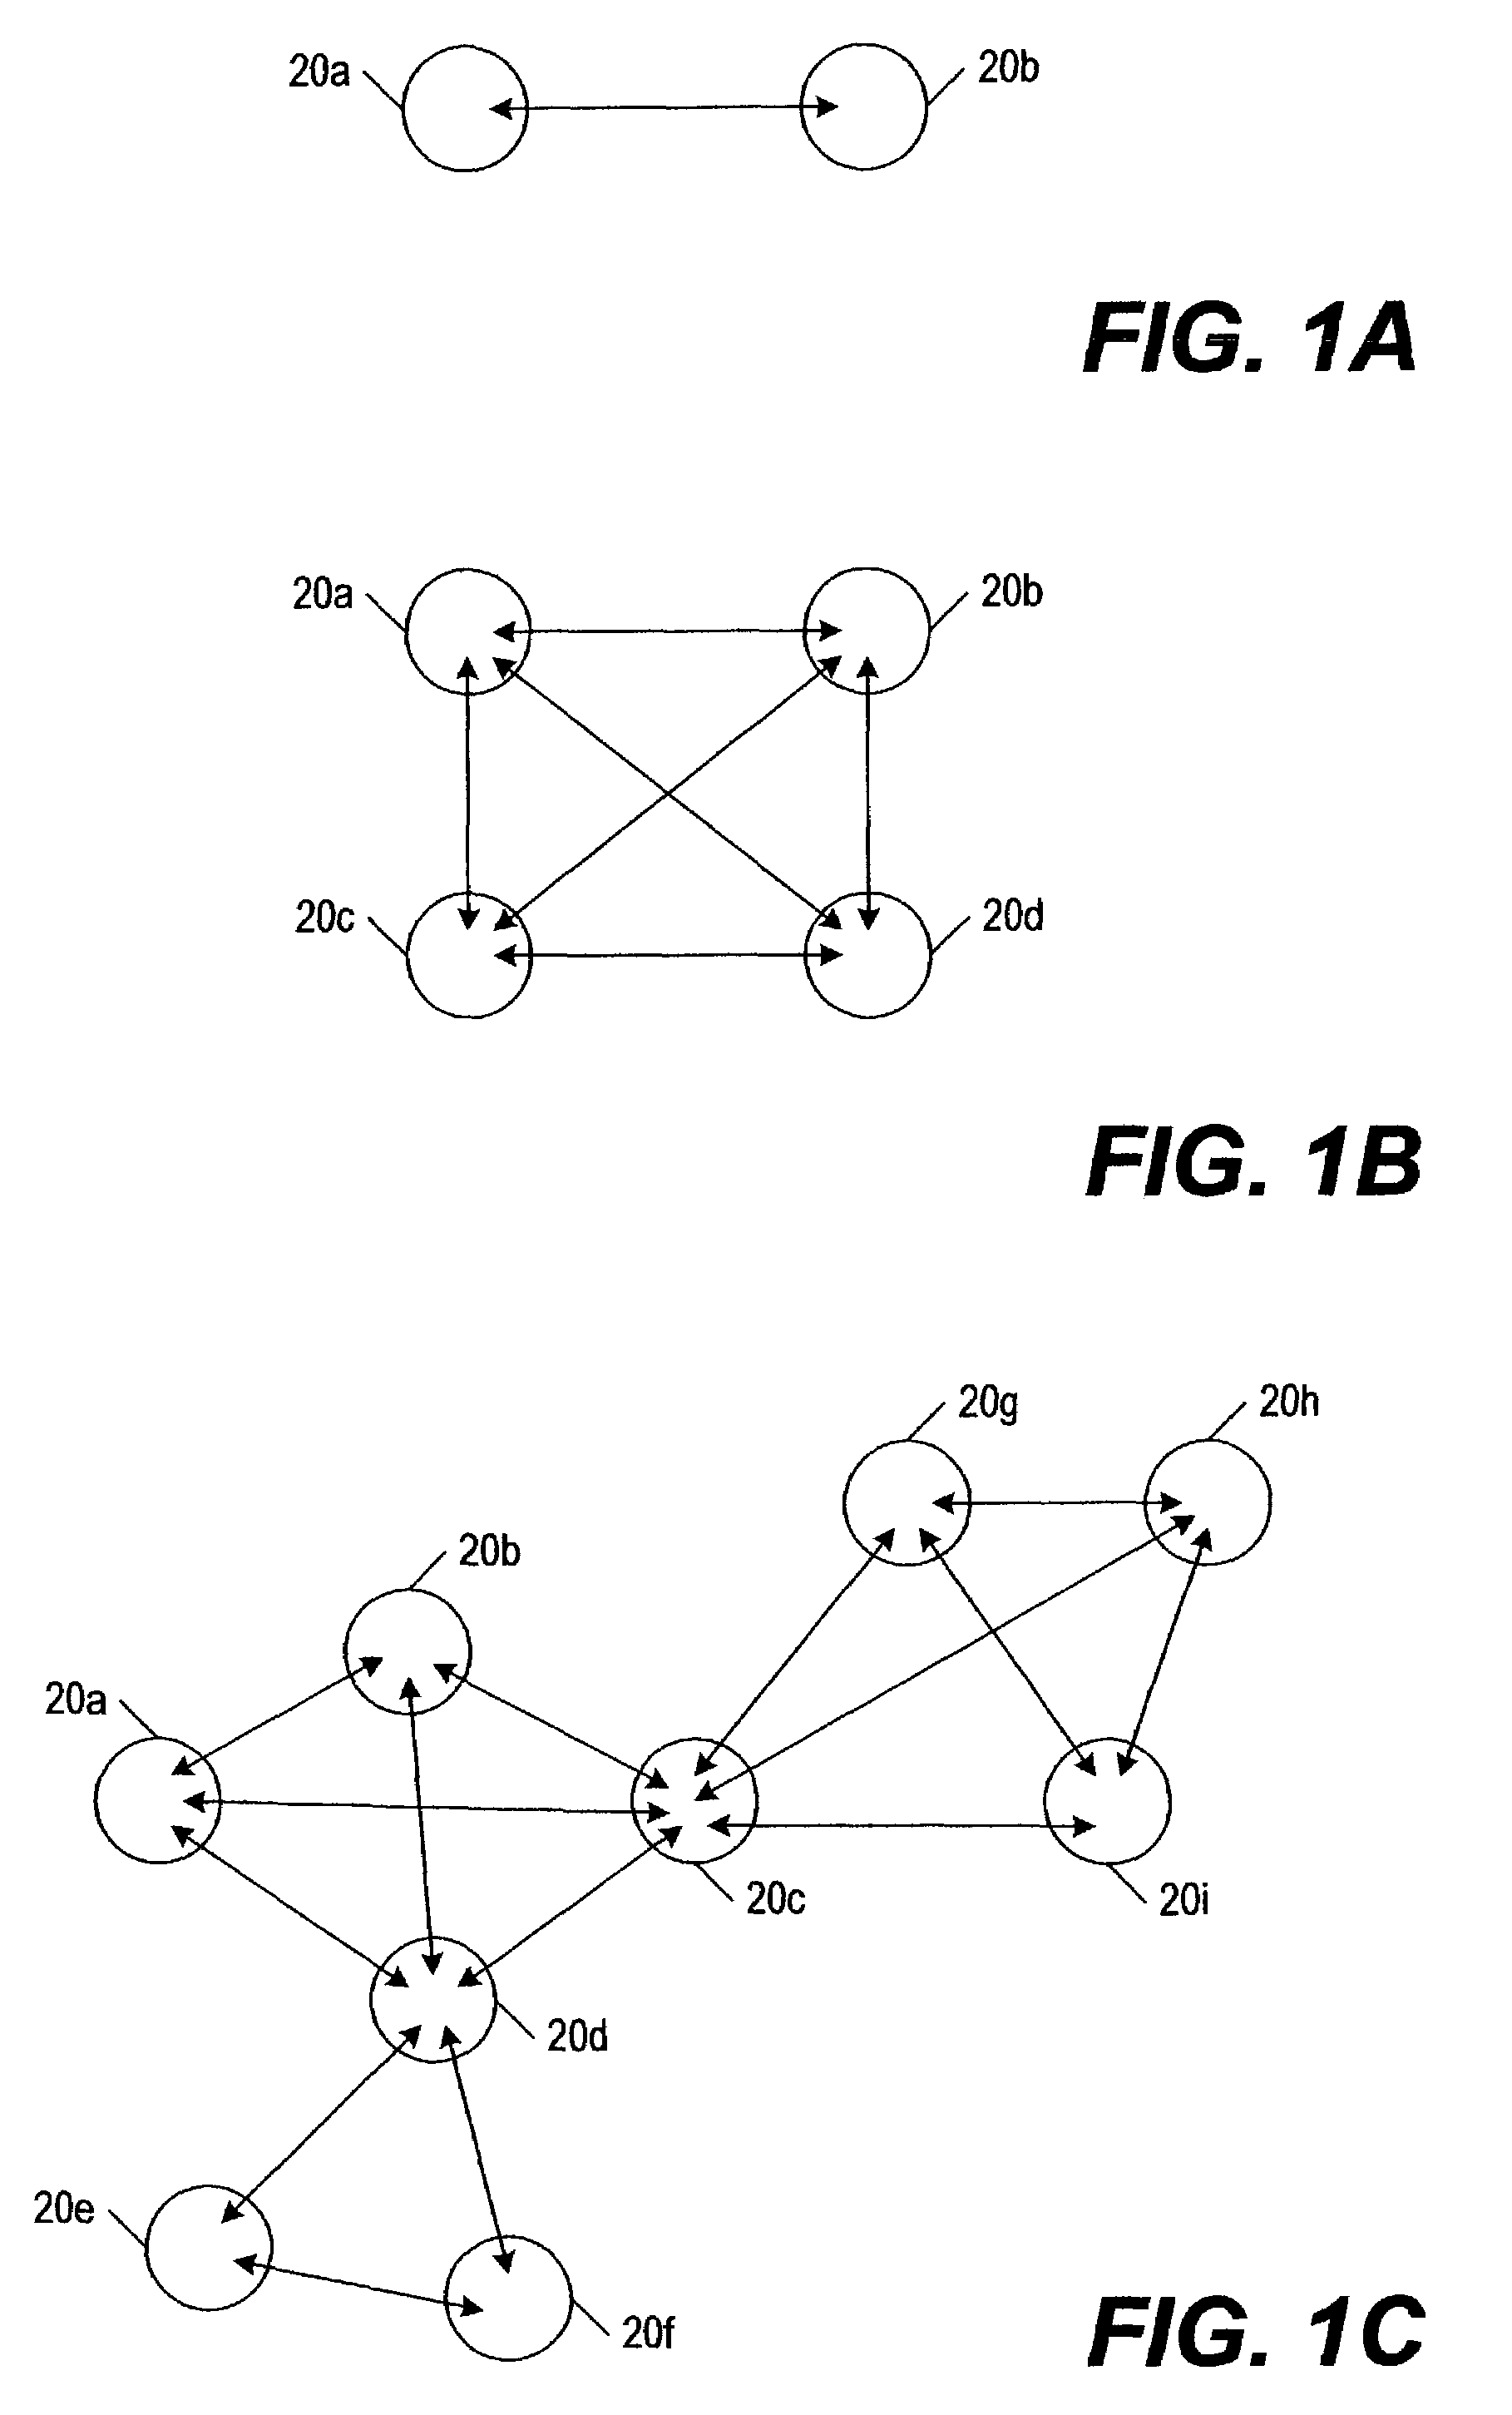 System for electronic file collaboration among multiple users using peer-to-peer network topology